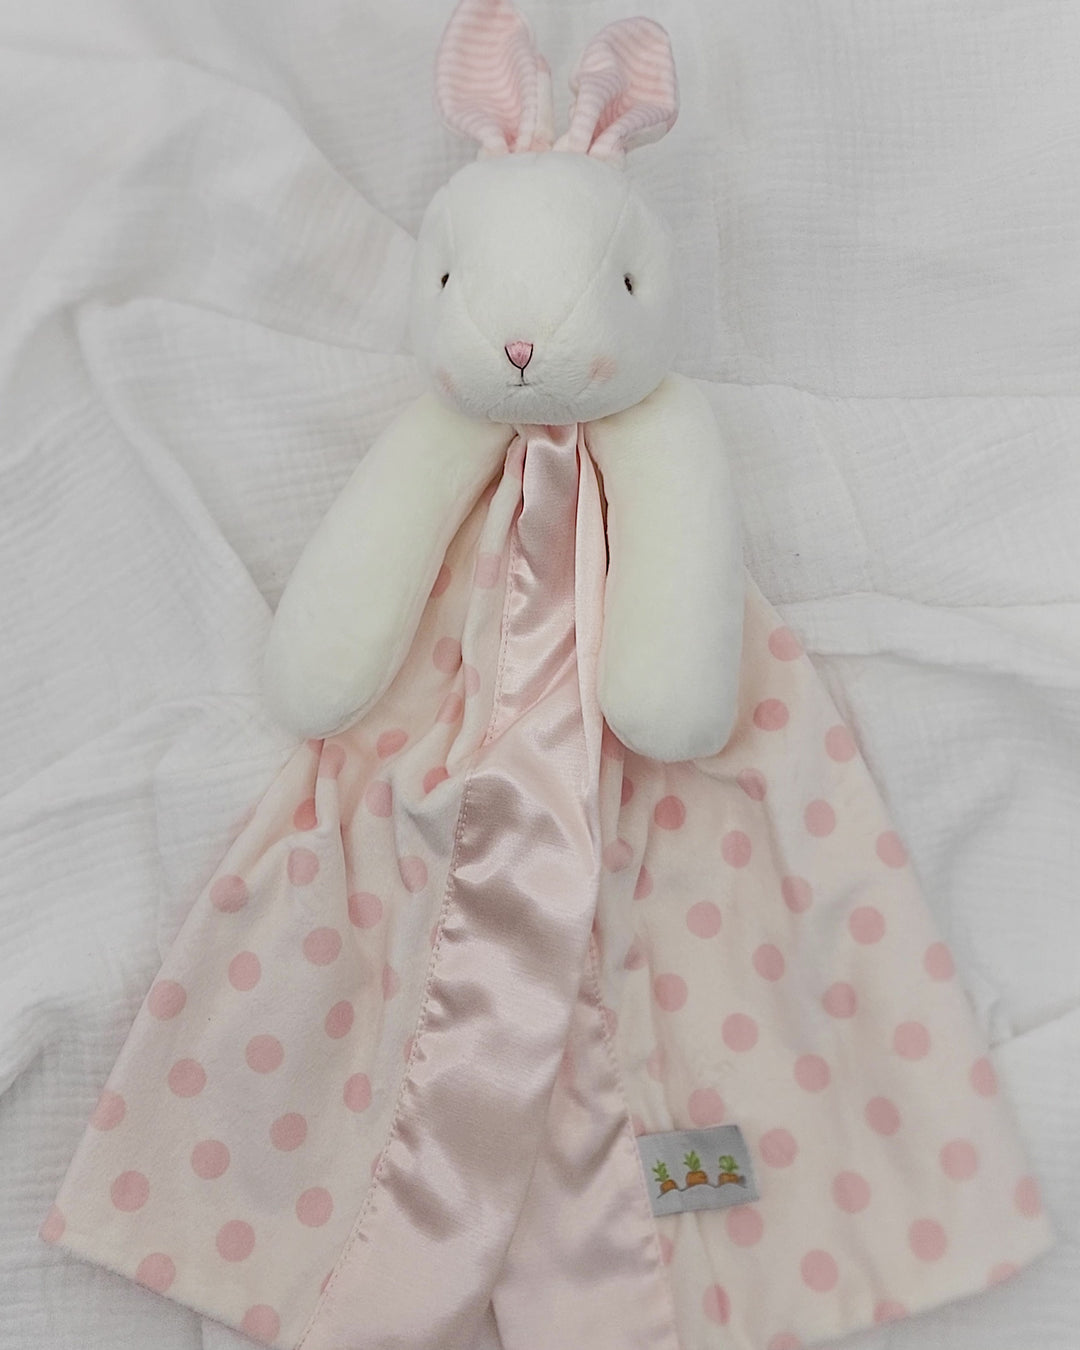 Personalized Lovey Baby Blanket - Bunnies by the Bay Buddy Blanket - Pink Blossom Dot